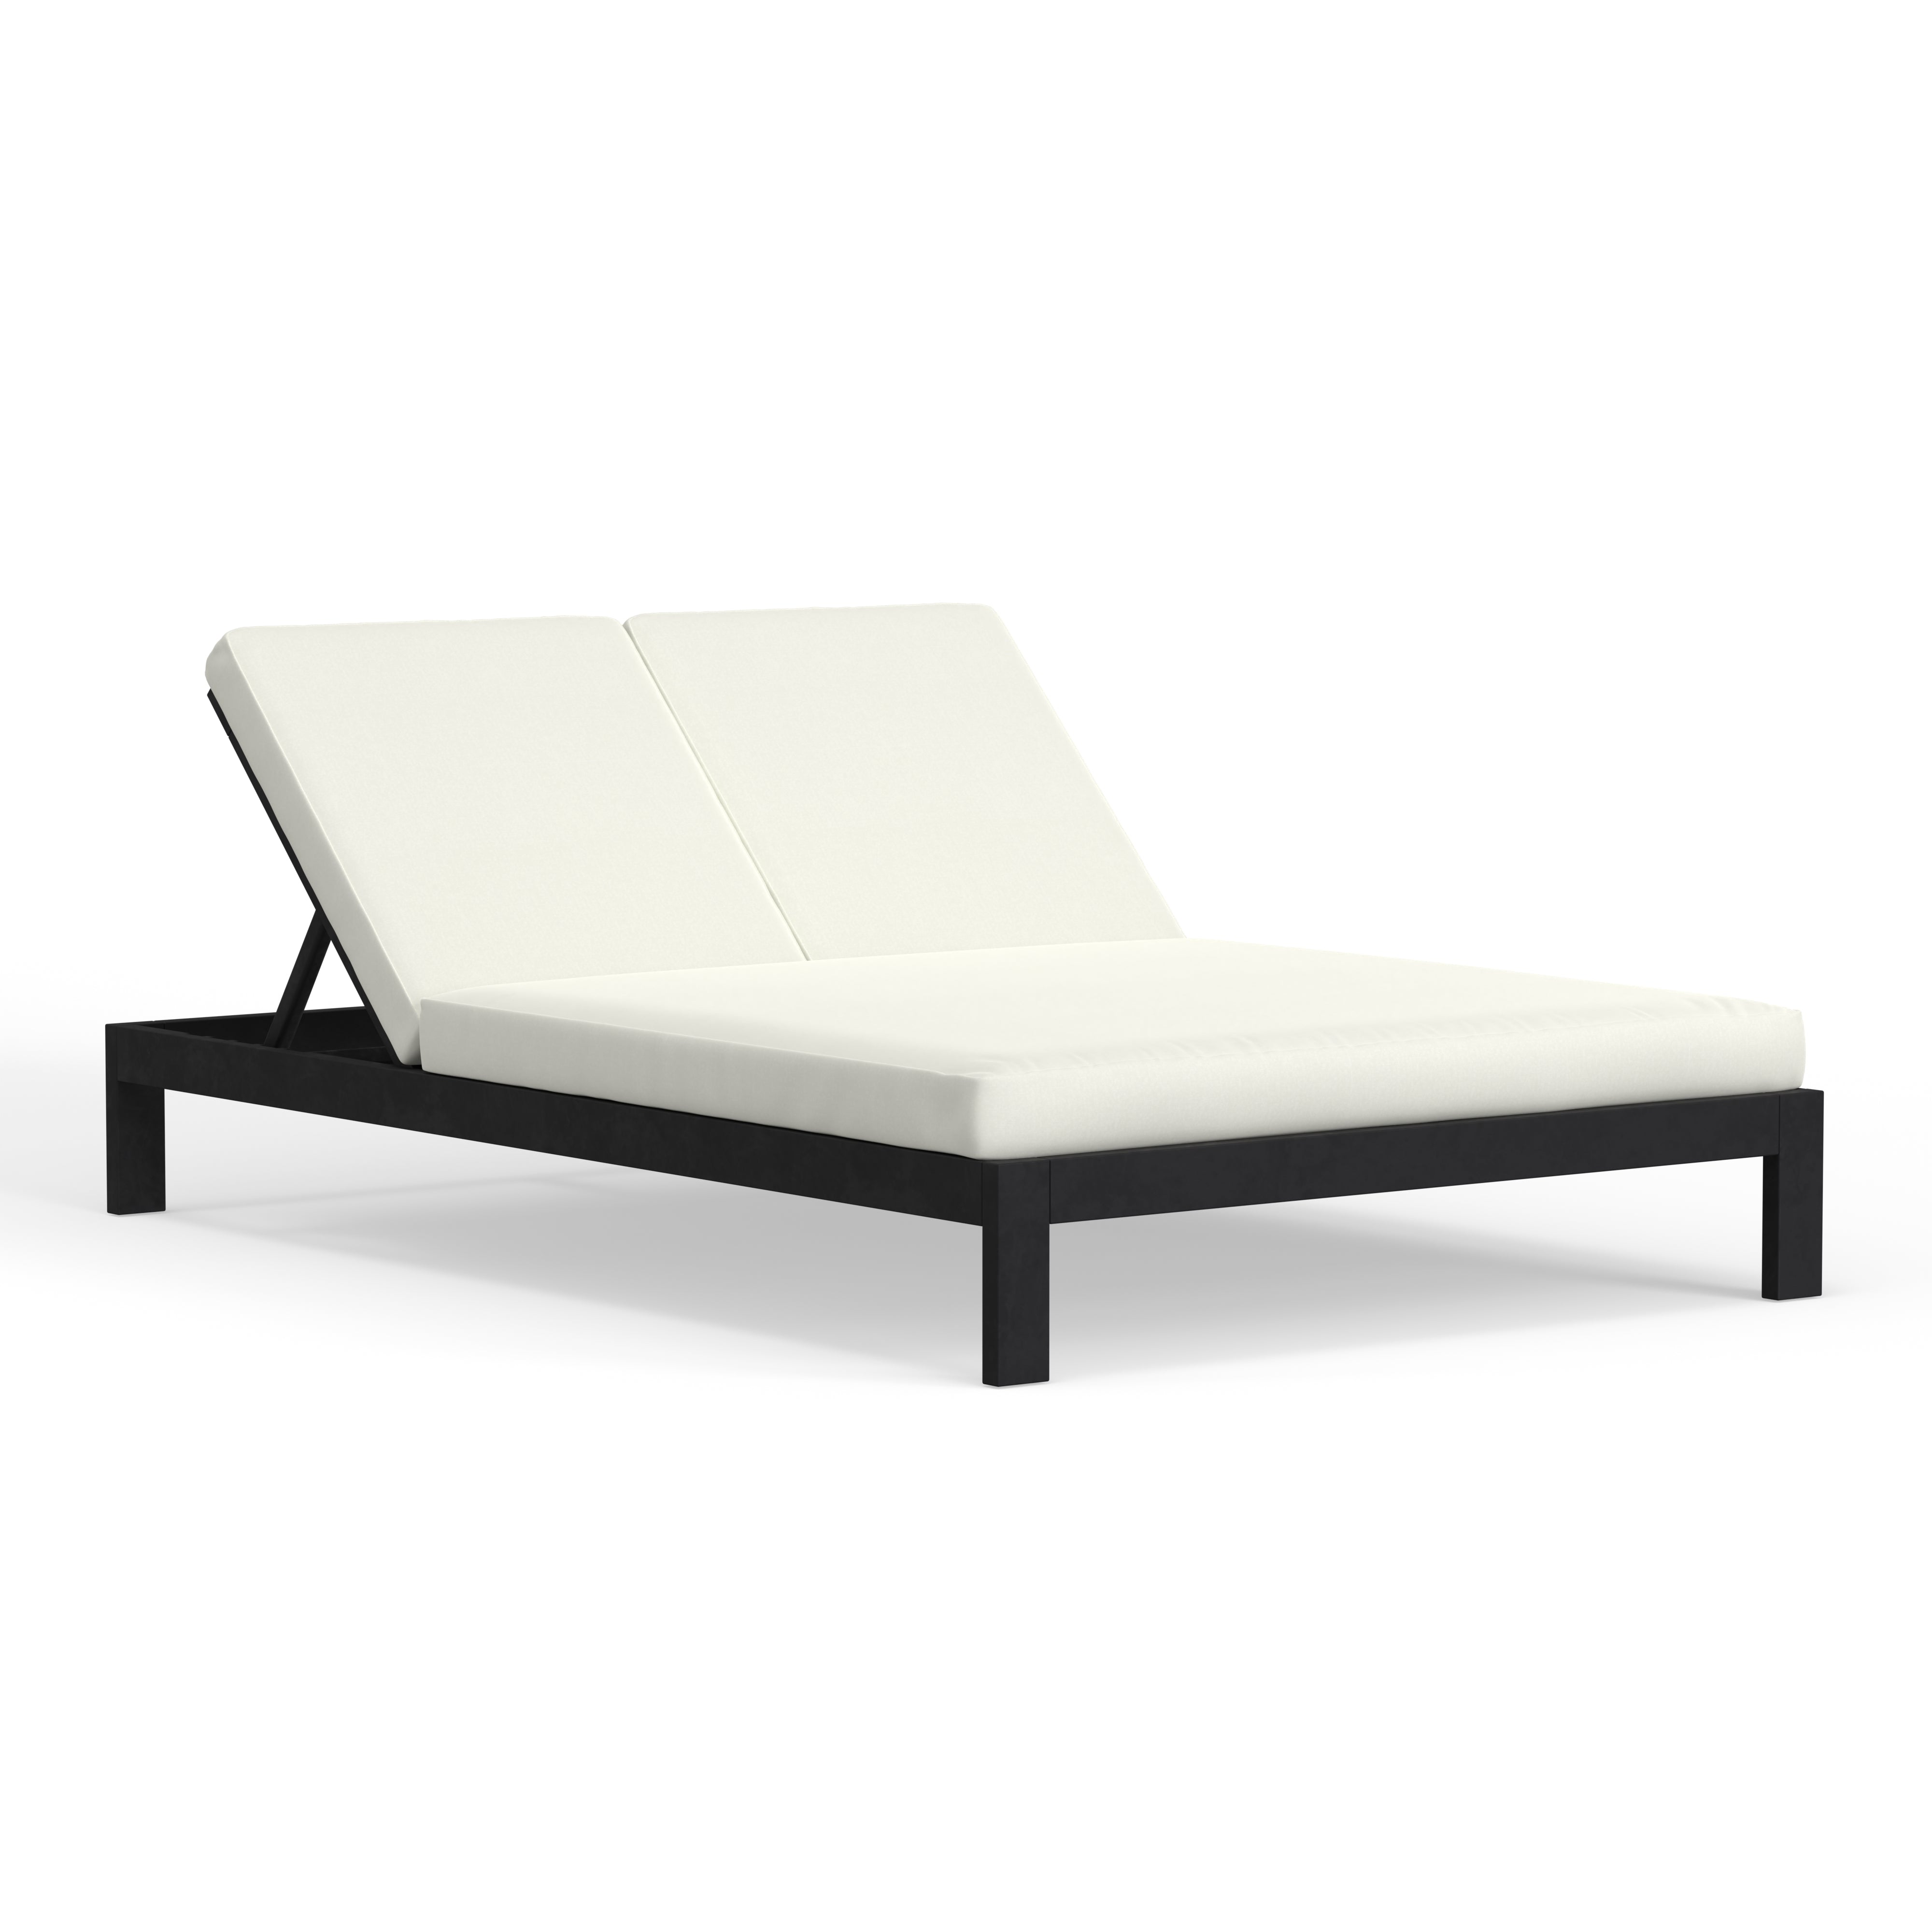 Luxury Outdoor Double Chaise Lounger